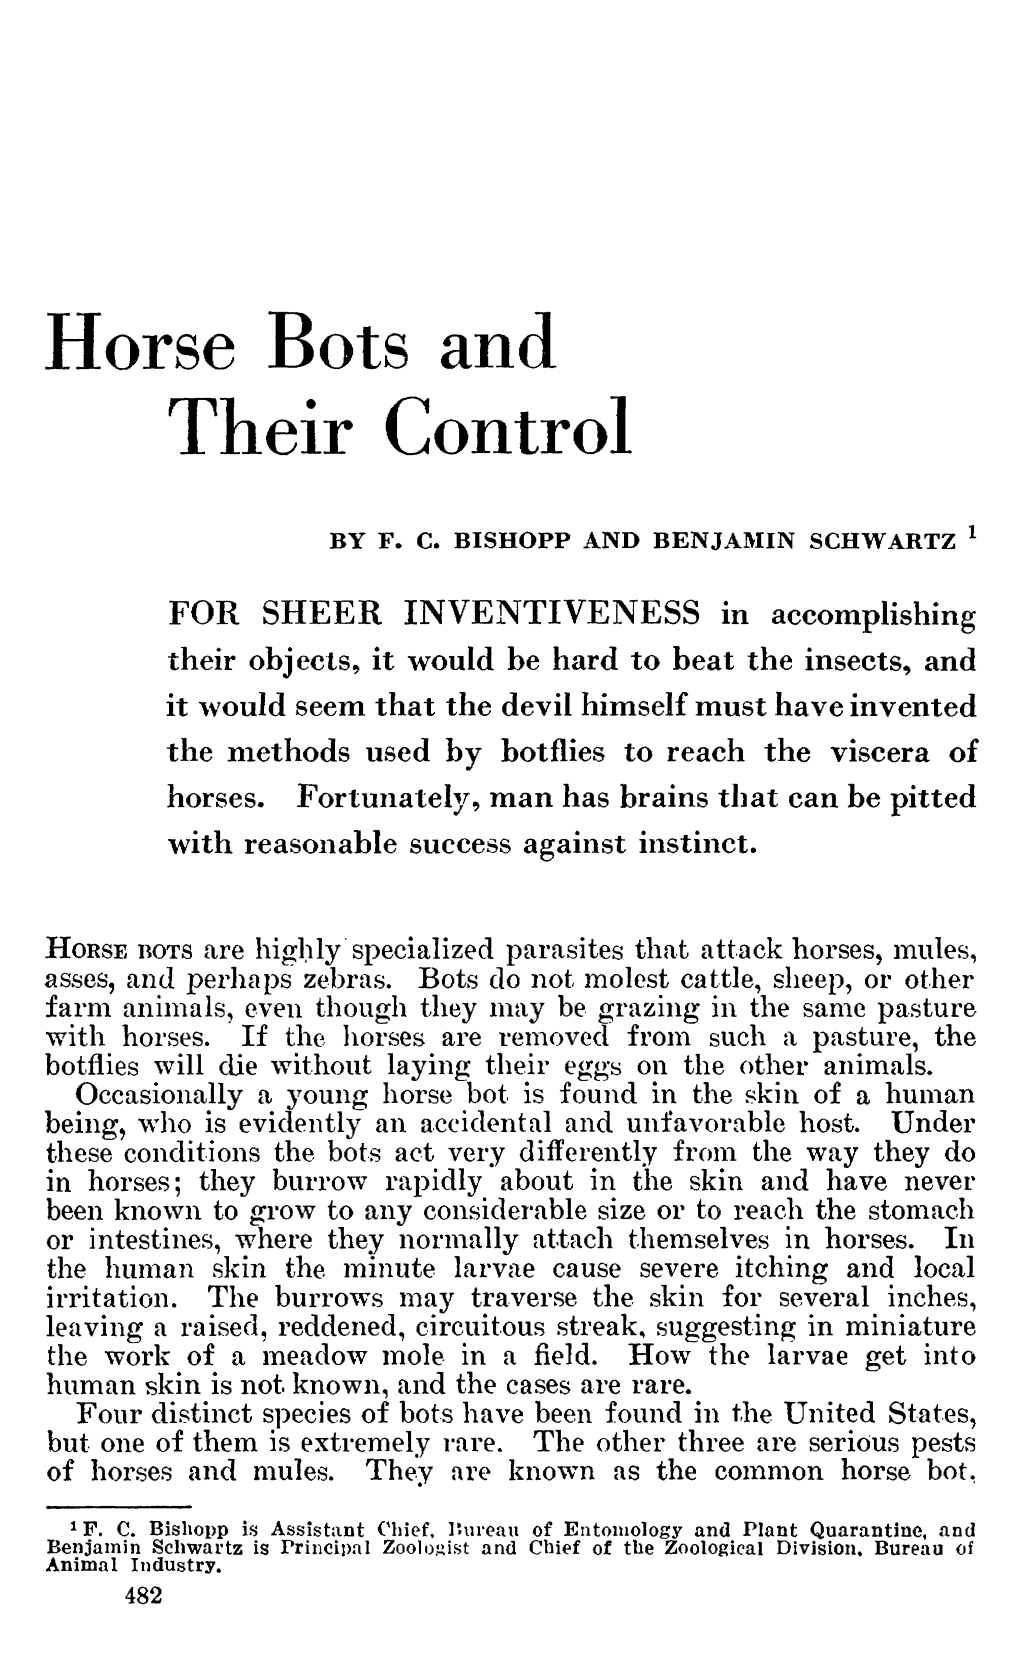 Horse Bots and Their Control